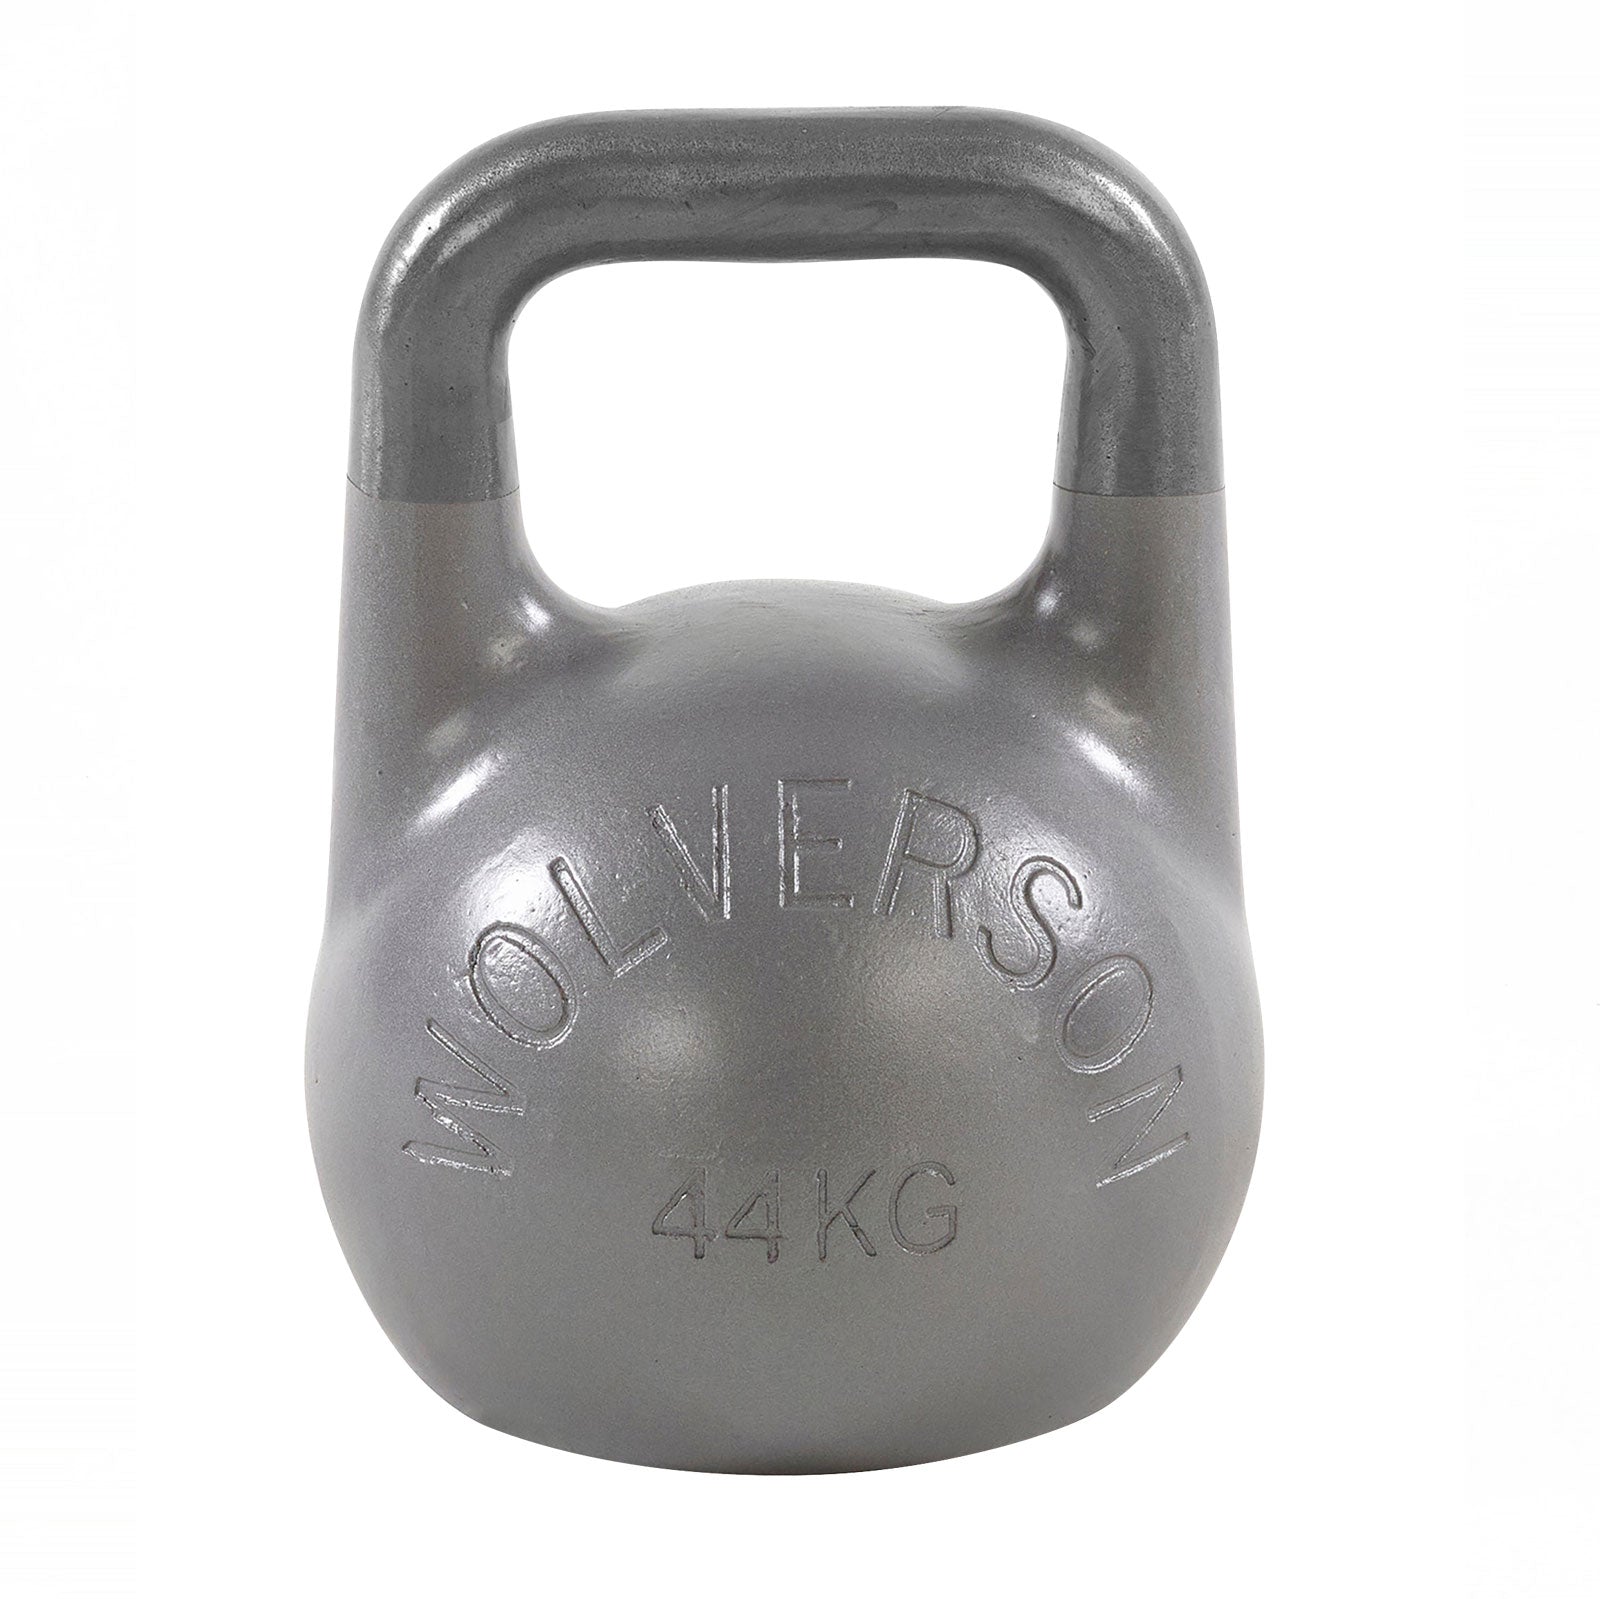 Wolverson Heavy Competition Kettlebells (44kg - Cosmetic 2nd)